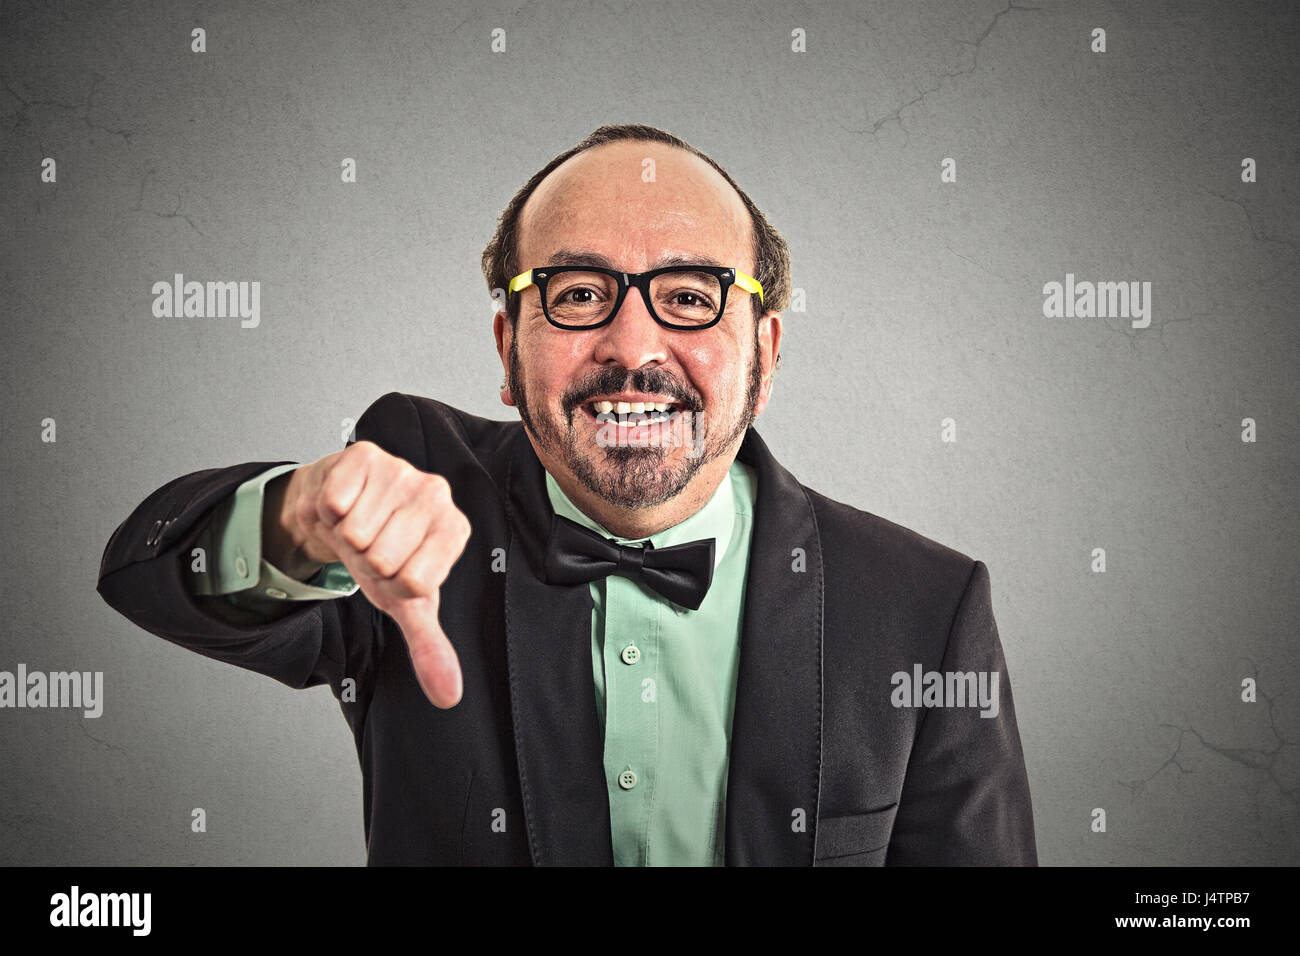 Closeup portrait sarcastic middle aged man showing thumbs down sign hand gesture happy someone made mistake lost failed isolated grey wall background. Stock Photo